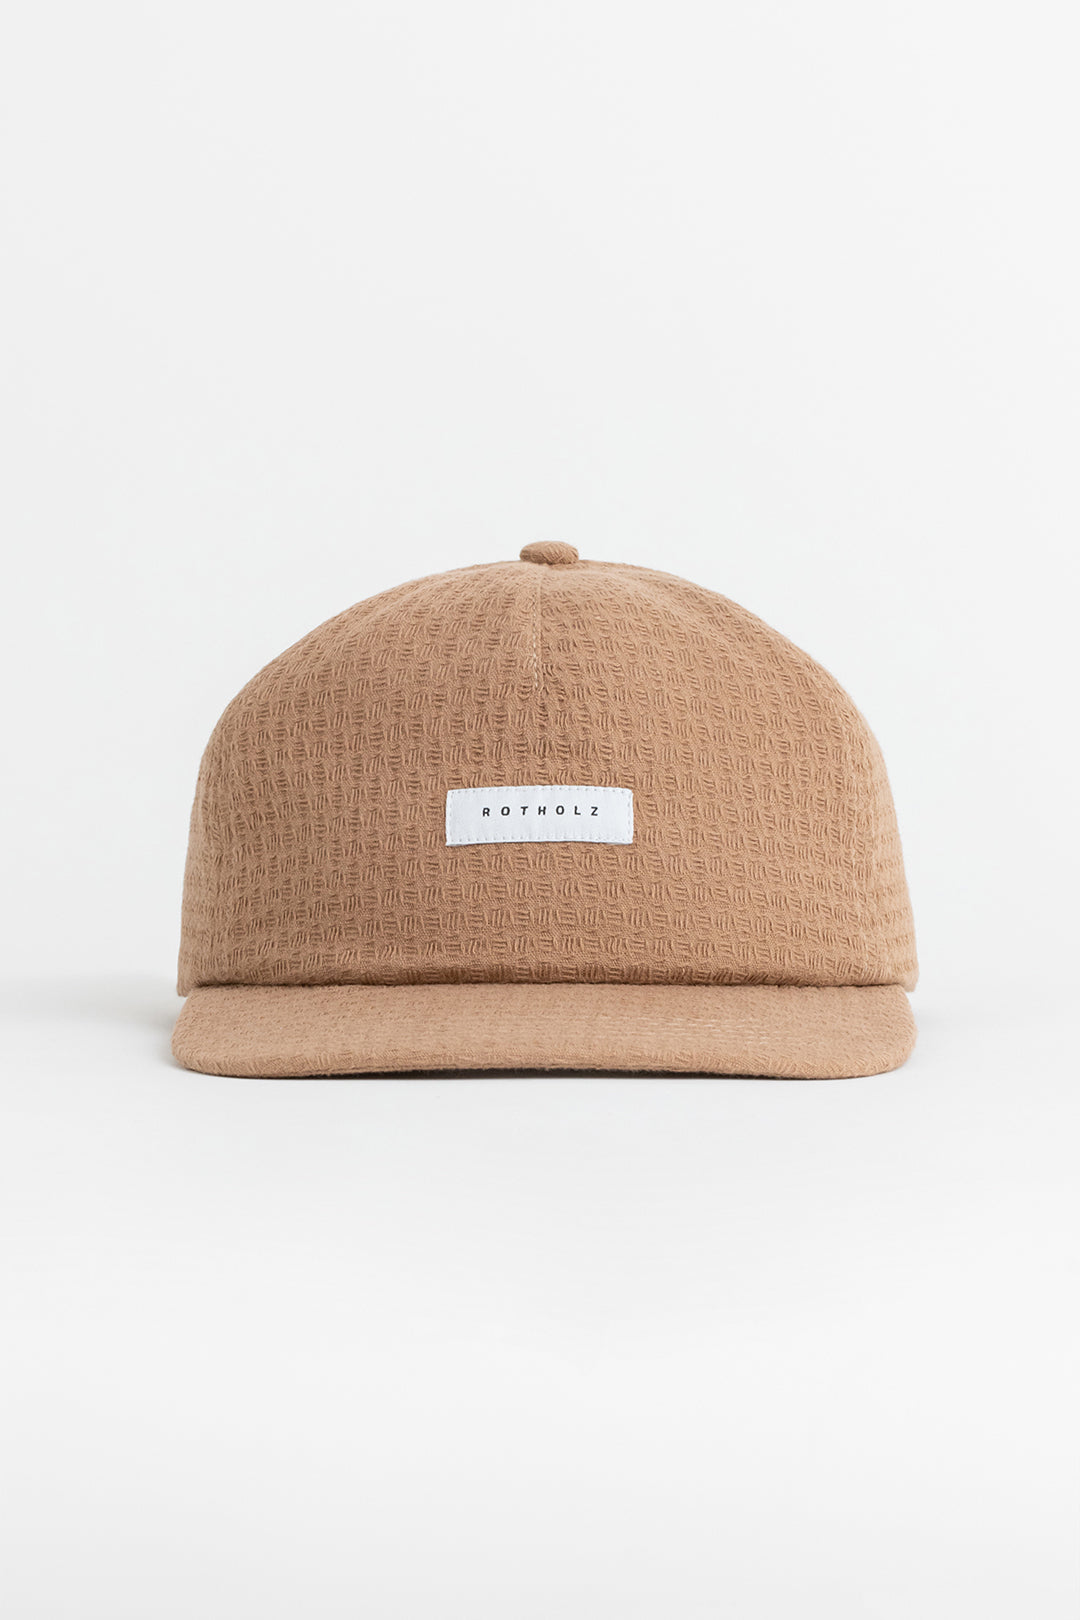 Light brown floppy cap made from 100% organic cotton from Rotholz